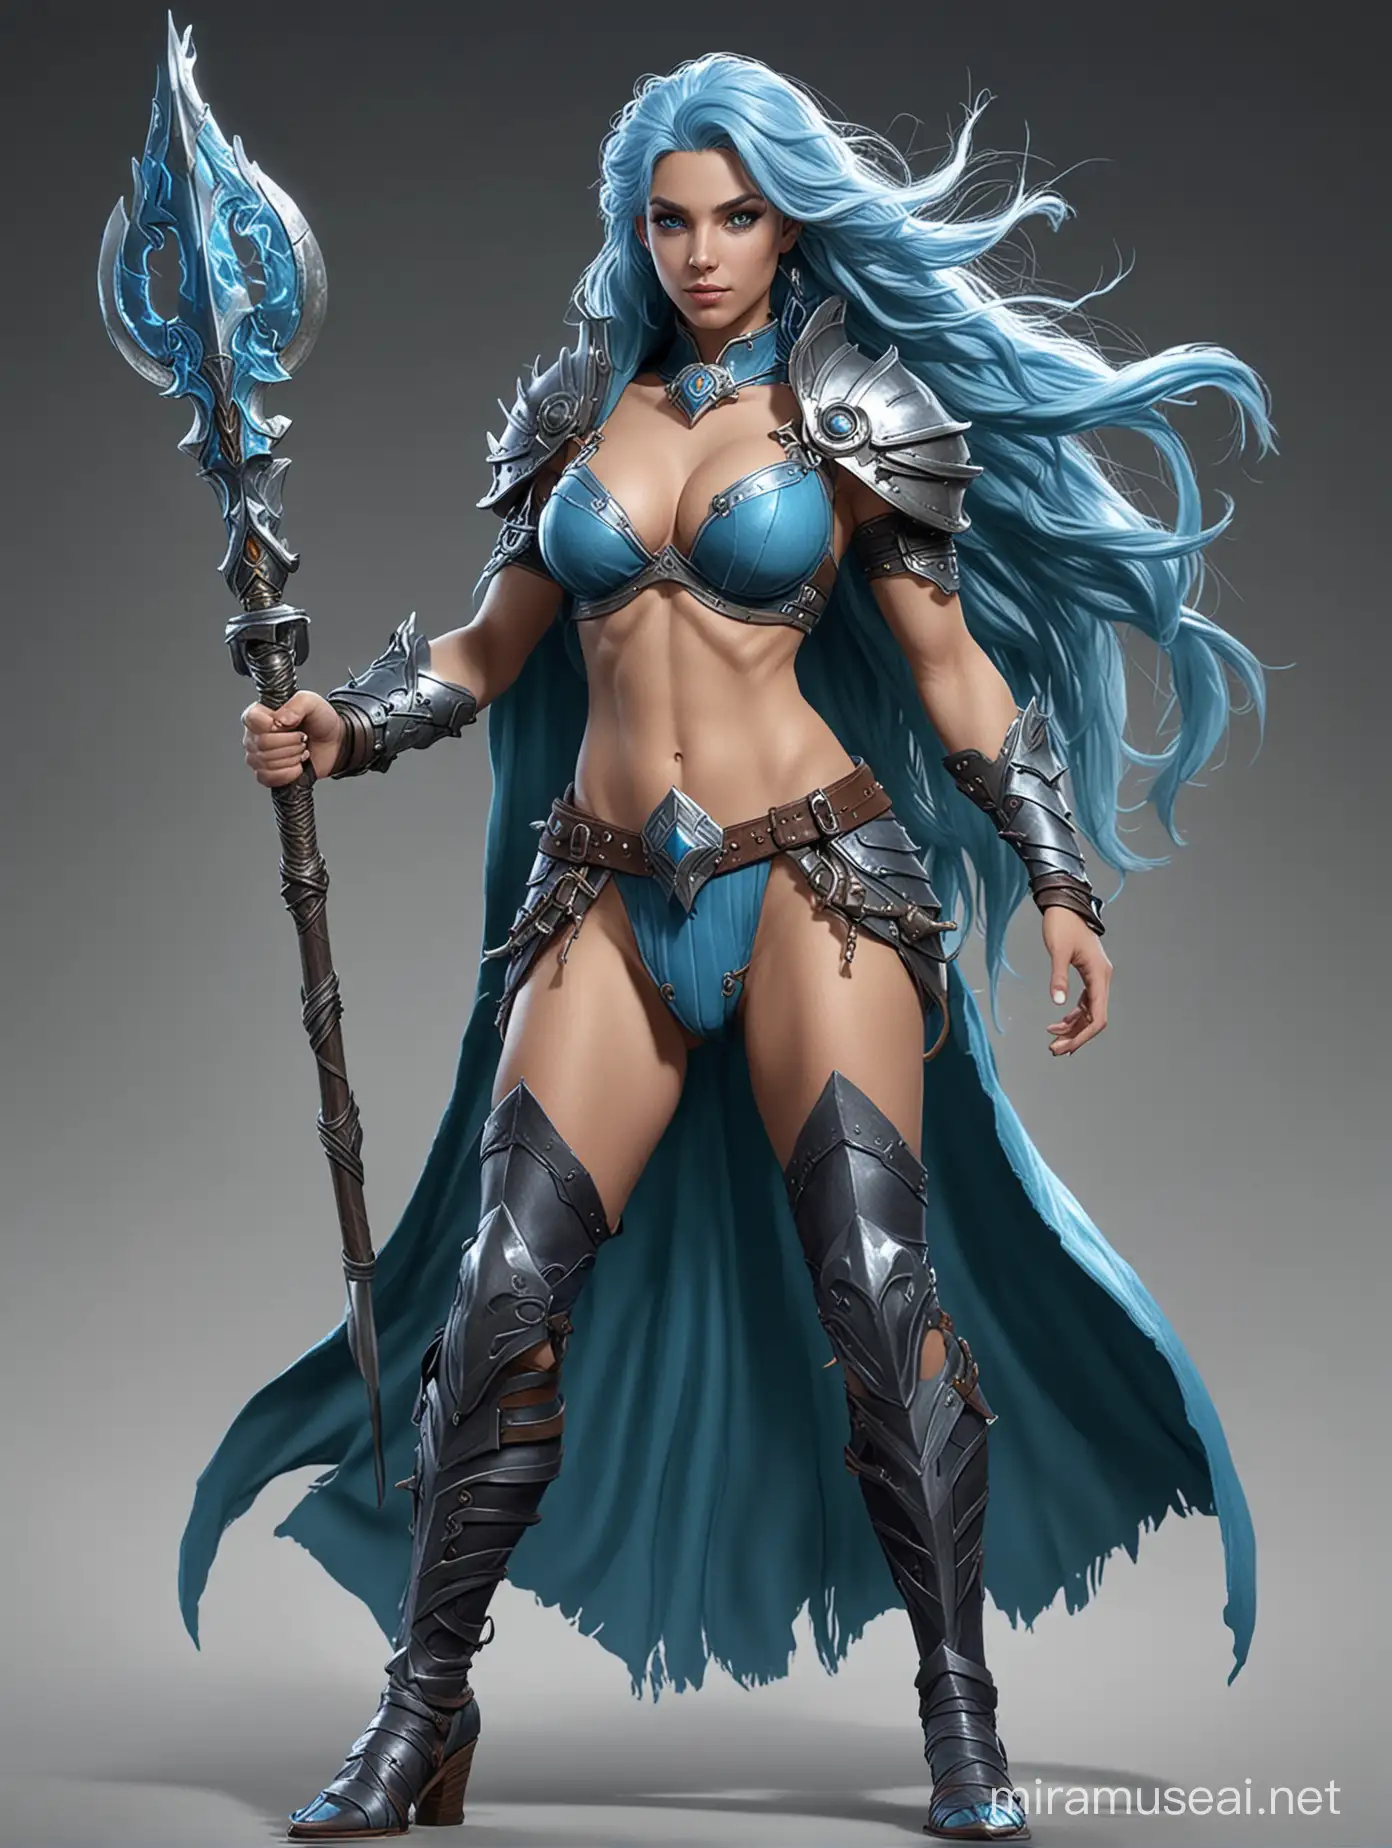 DND triton tempest cleric, sexy female, blue skin, lang hair, full body image
